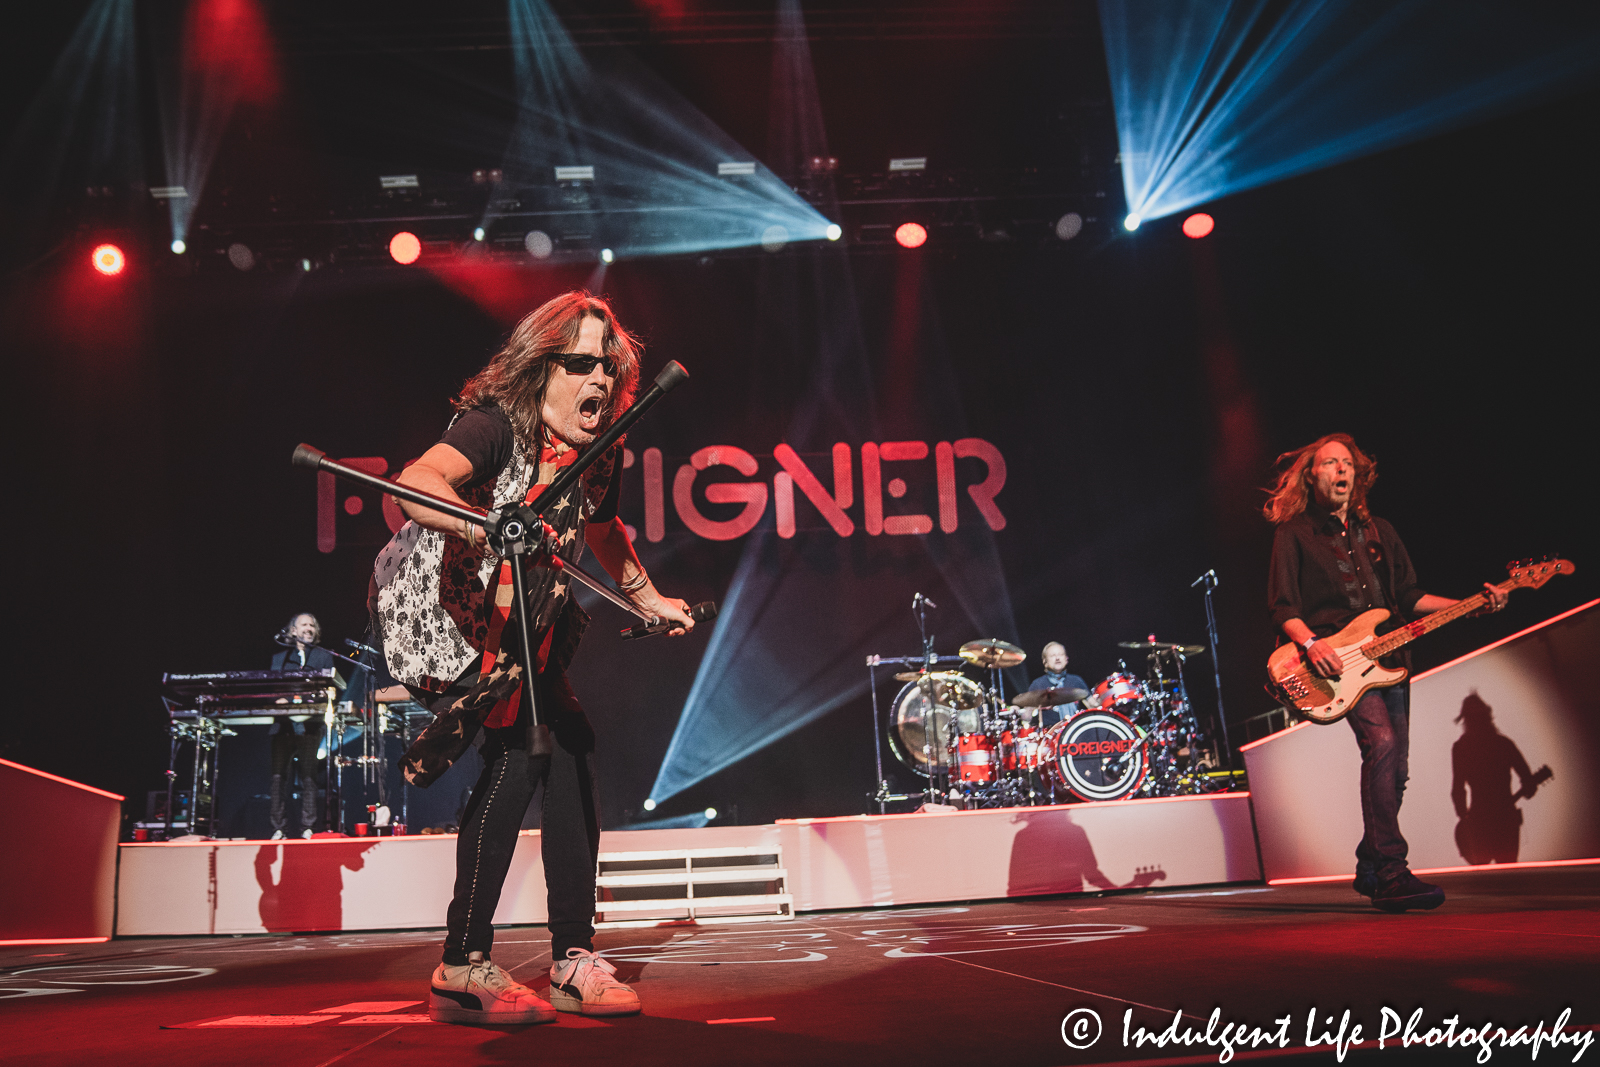 Foreigner live in concert performing "Double Vision" at Hartman Arena in Park City, KS on April 40, 2023.